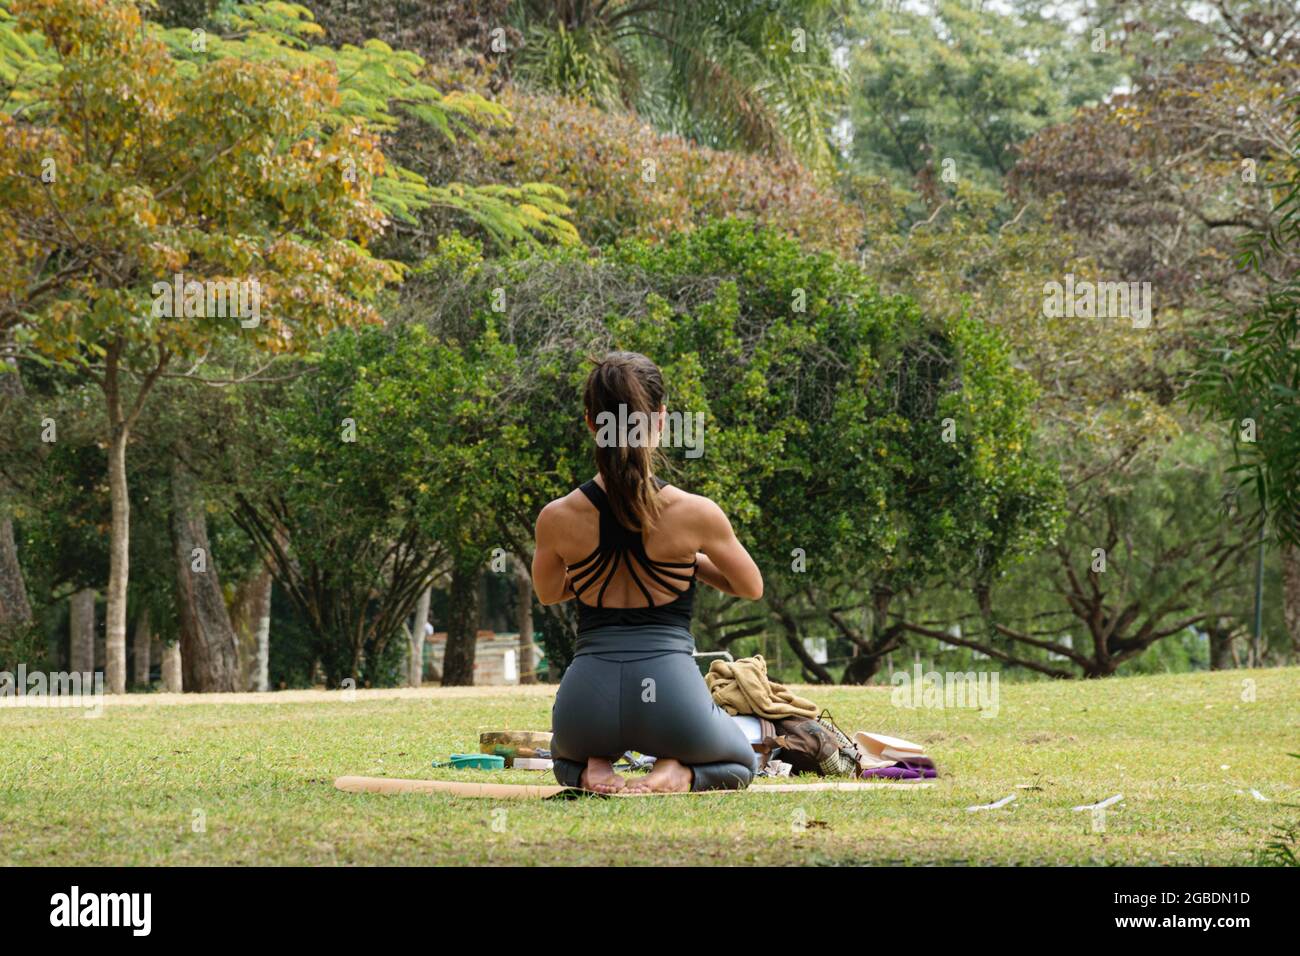 Sao Paulo, SP, Brazil, July 16 2021. 40-year-old woman with ripped back sitting on her feet in a yoga position in a public park. Stock Photo